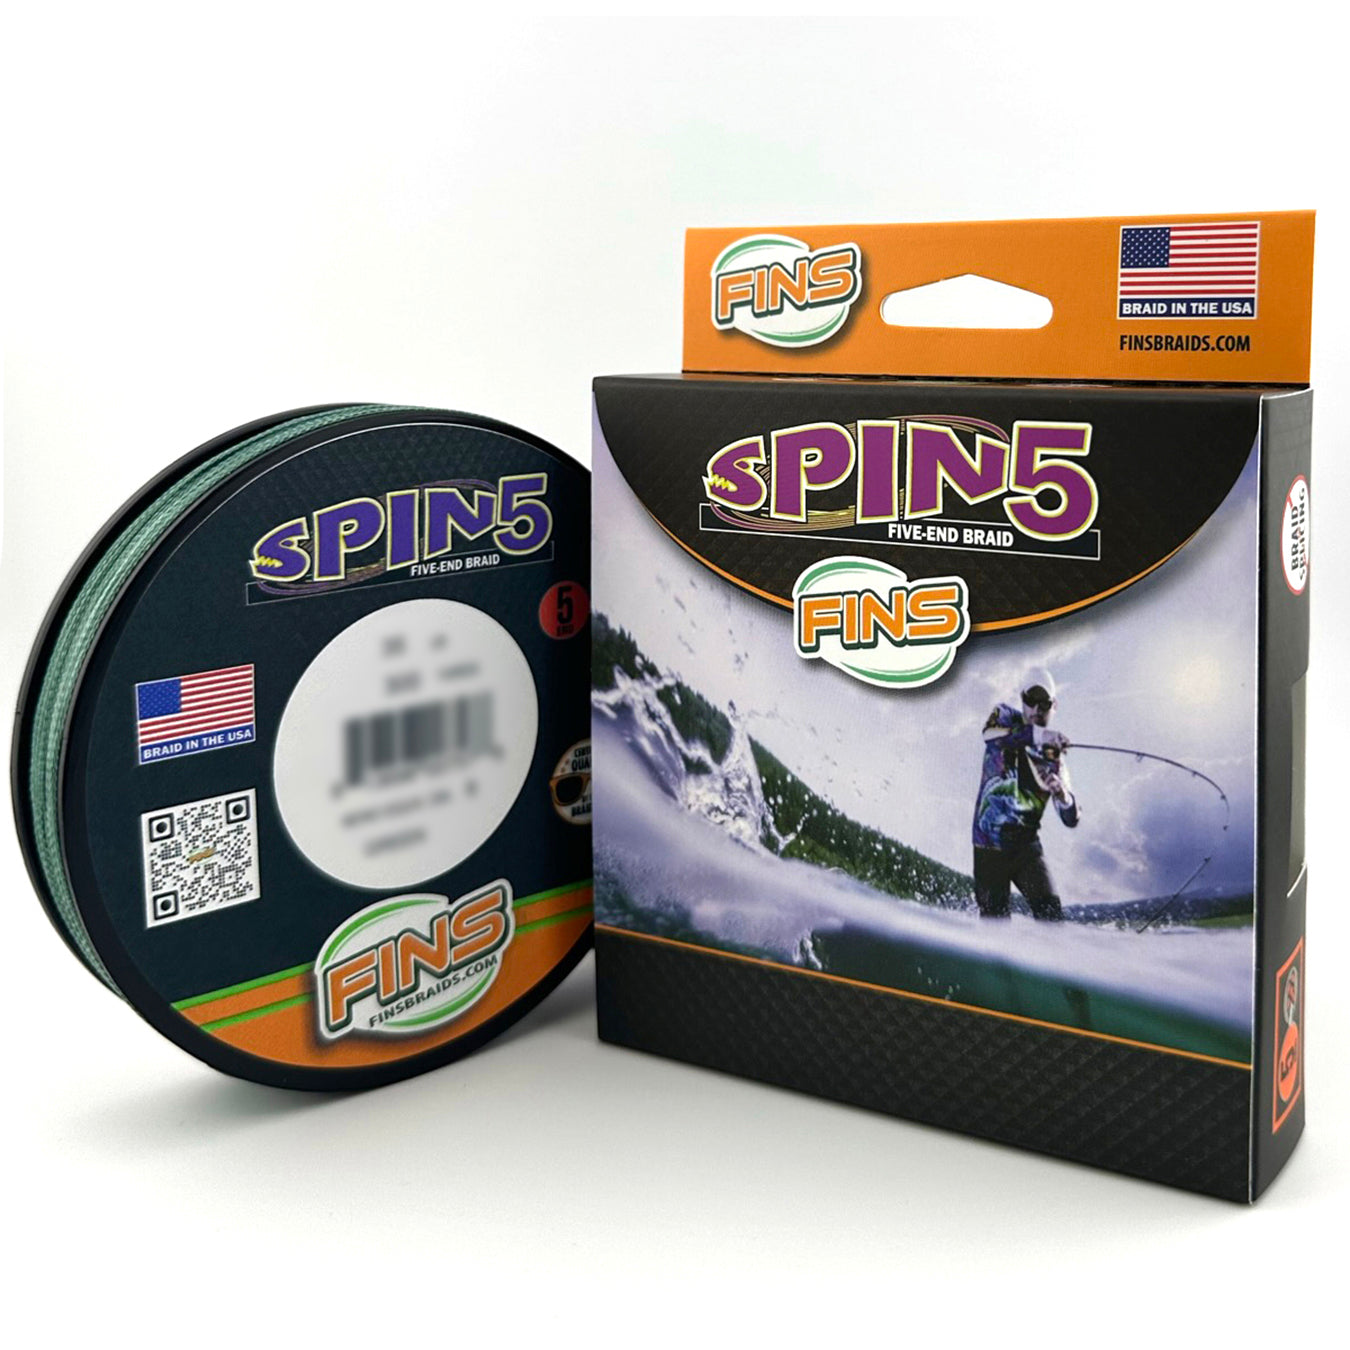 Fins Spin5 Fishing Braid, Size: 150 Yards